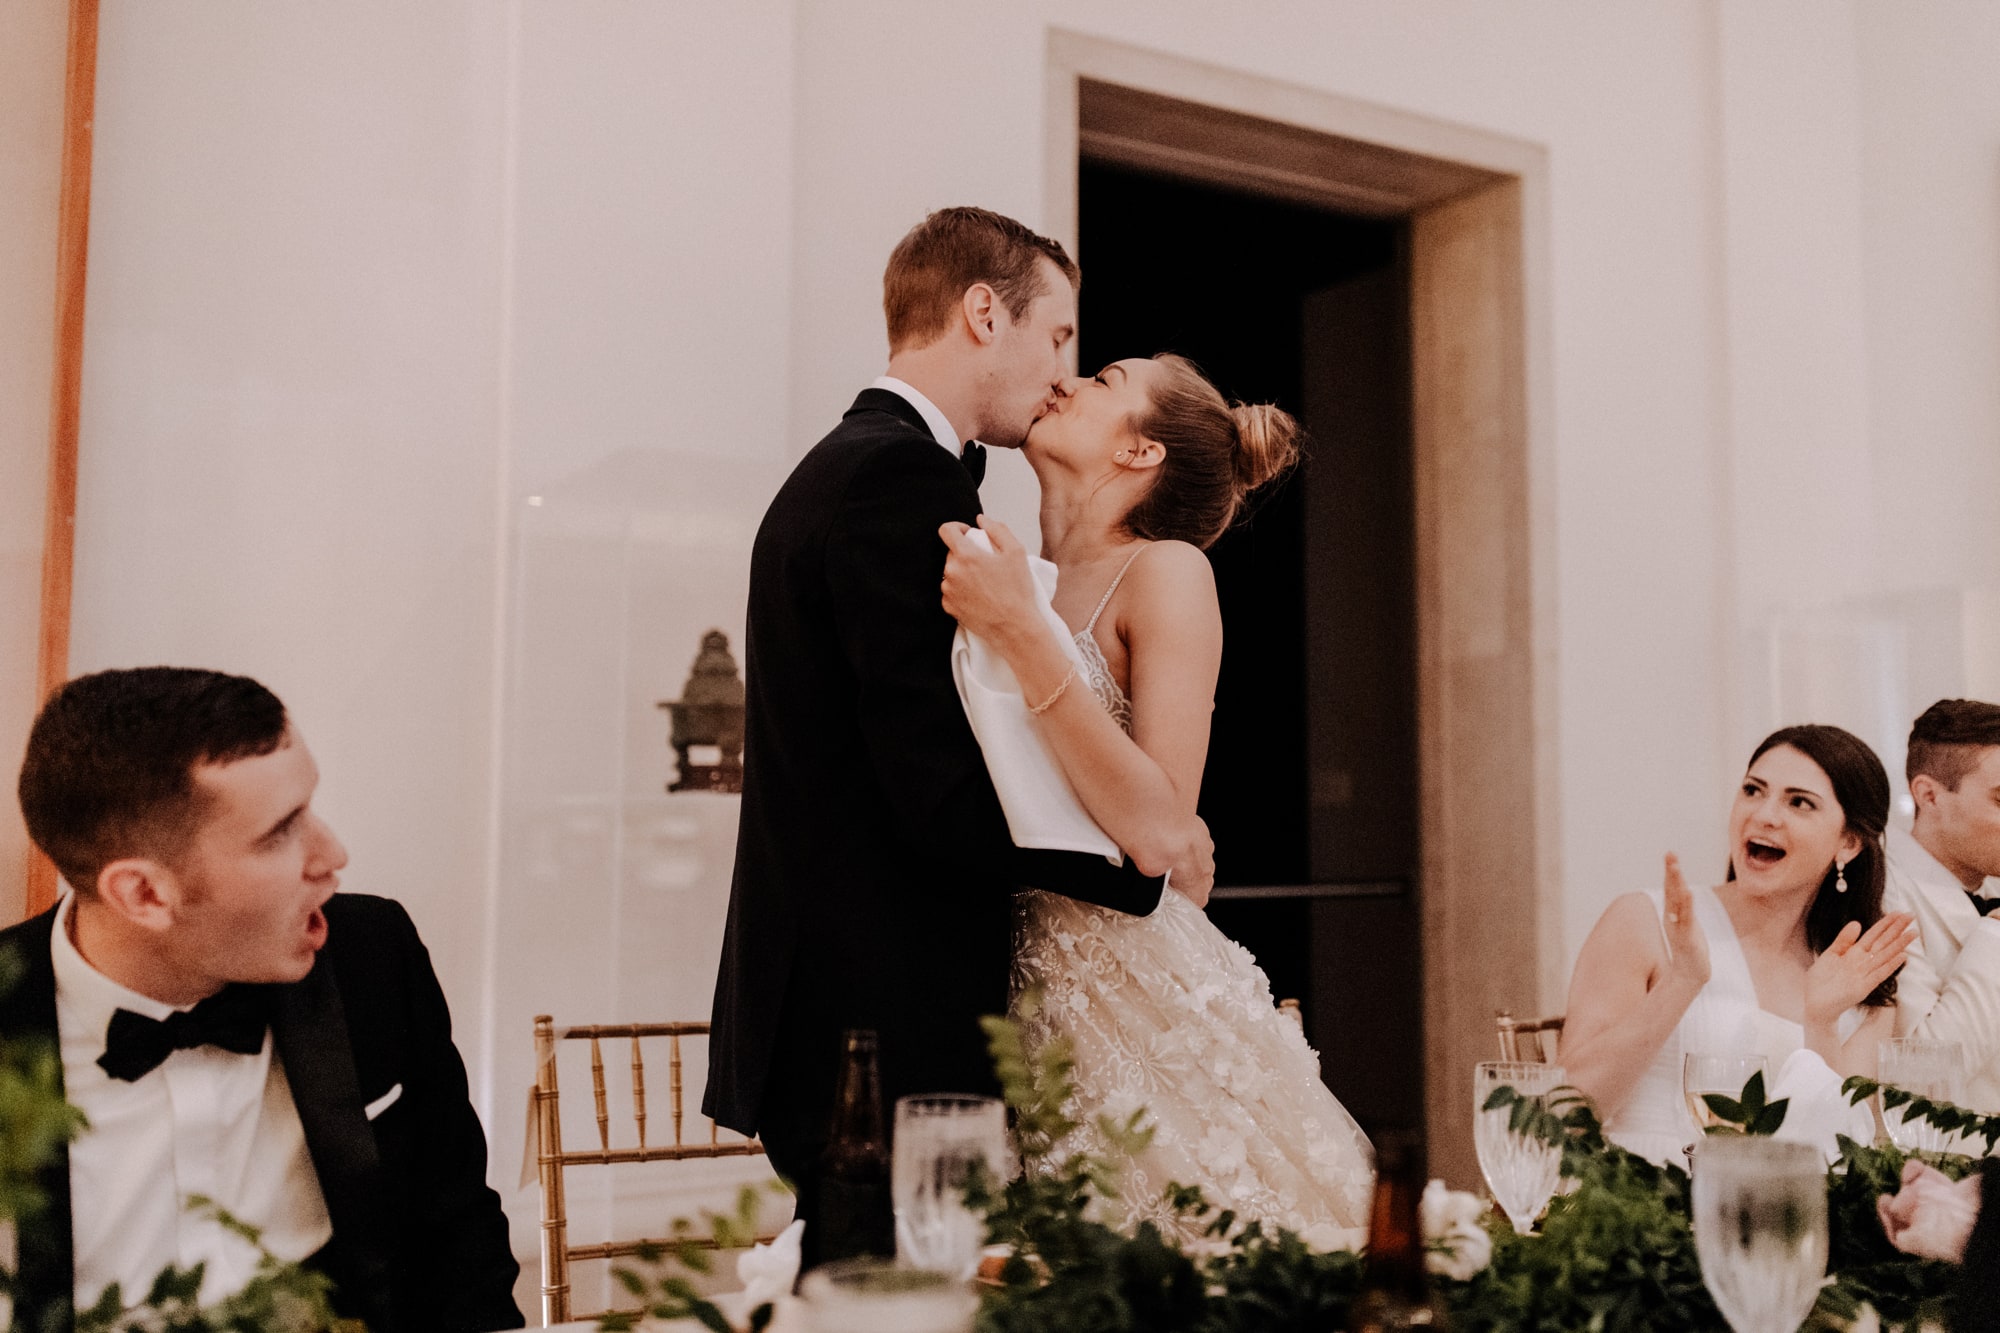 A bride and groom stand to kiss during their wedding dinner inside the Minneapolis Institute of Art.